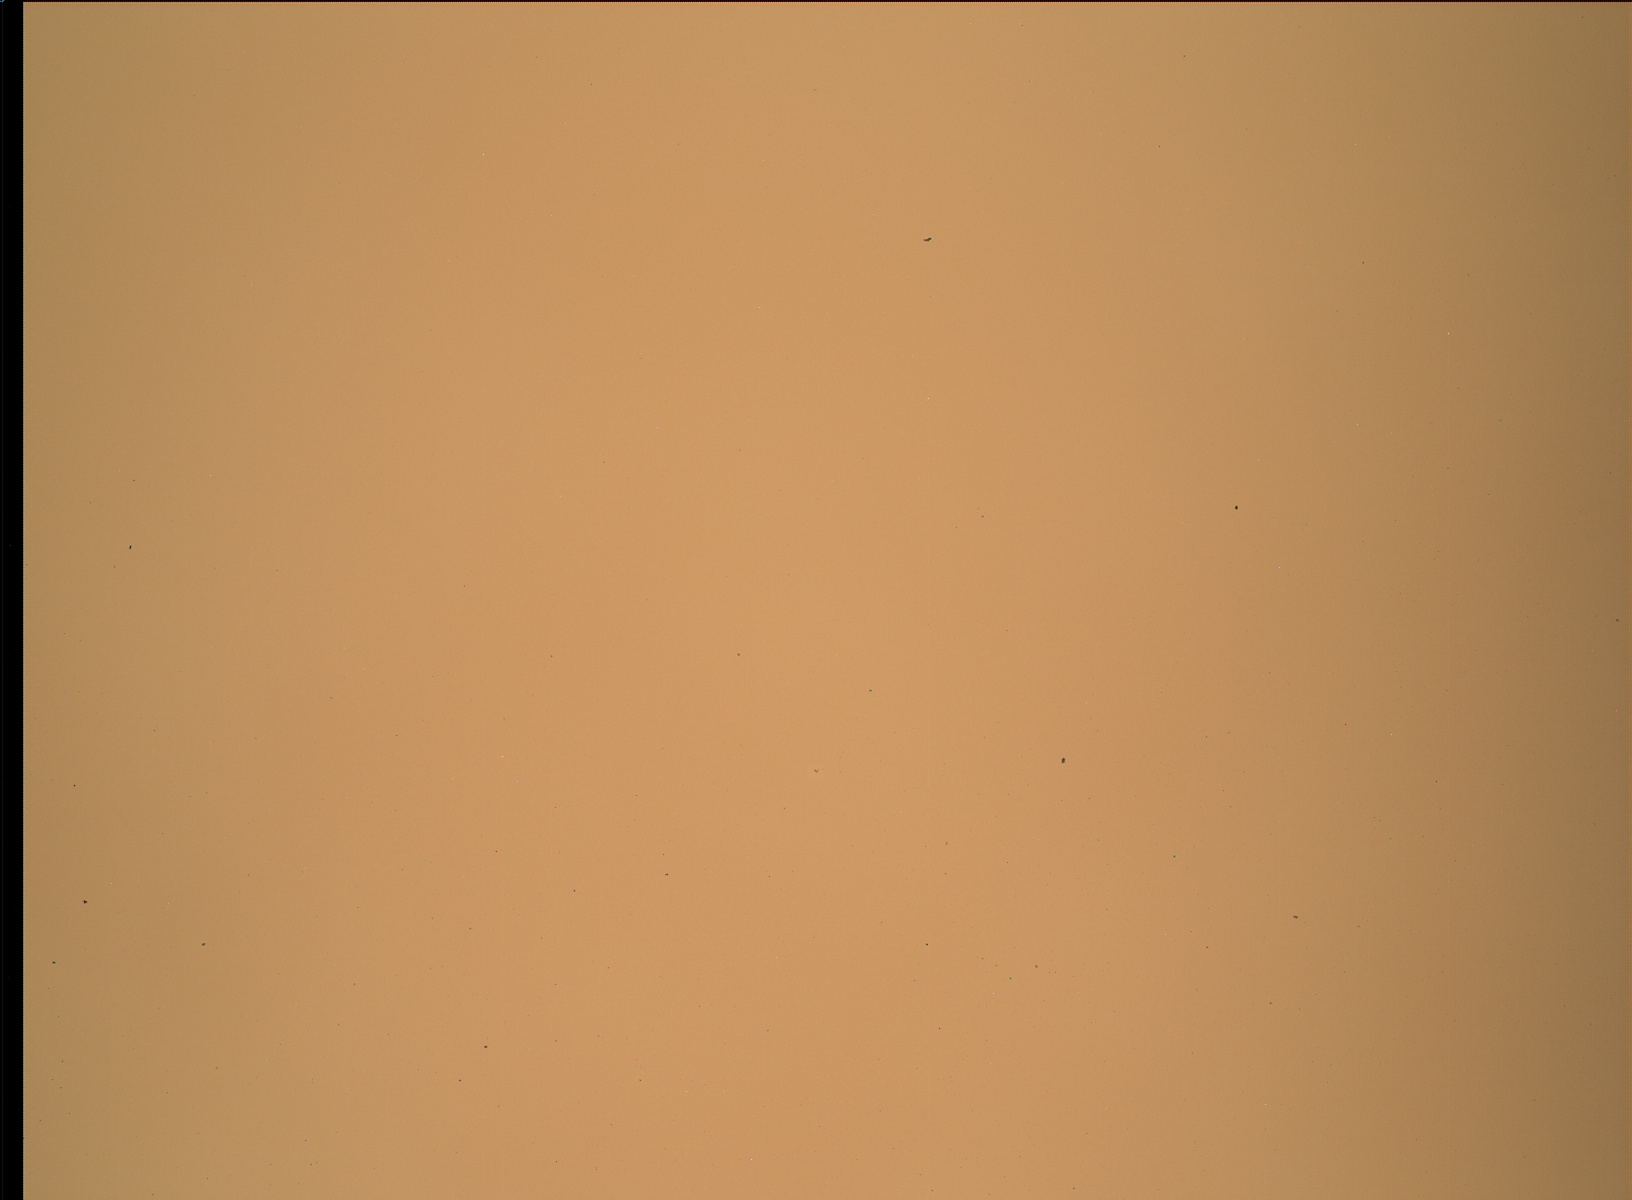 Nasa's Mars rover Curiosity acquired this image using its Mars Hand Lens Imager (MAHLI) on Sol 2478